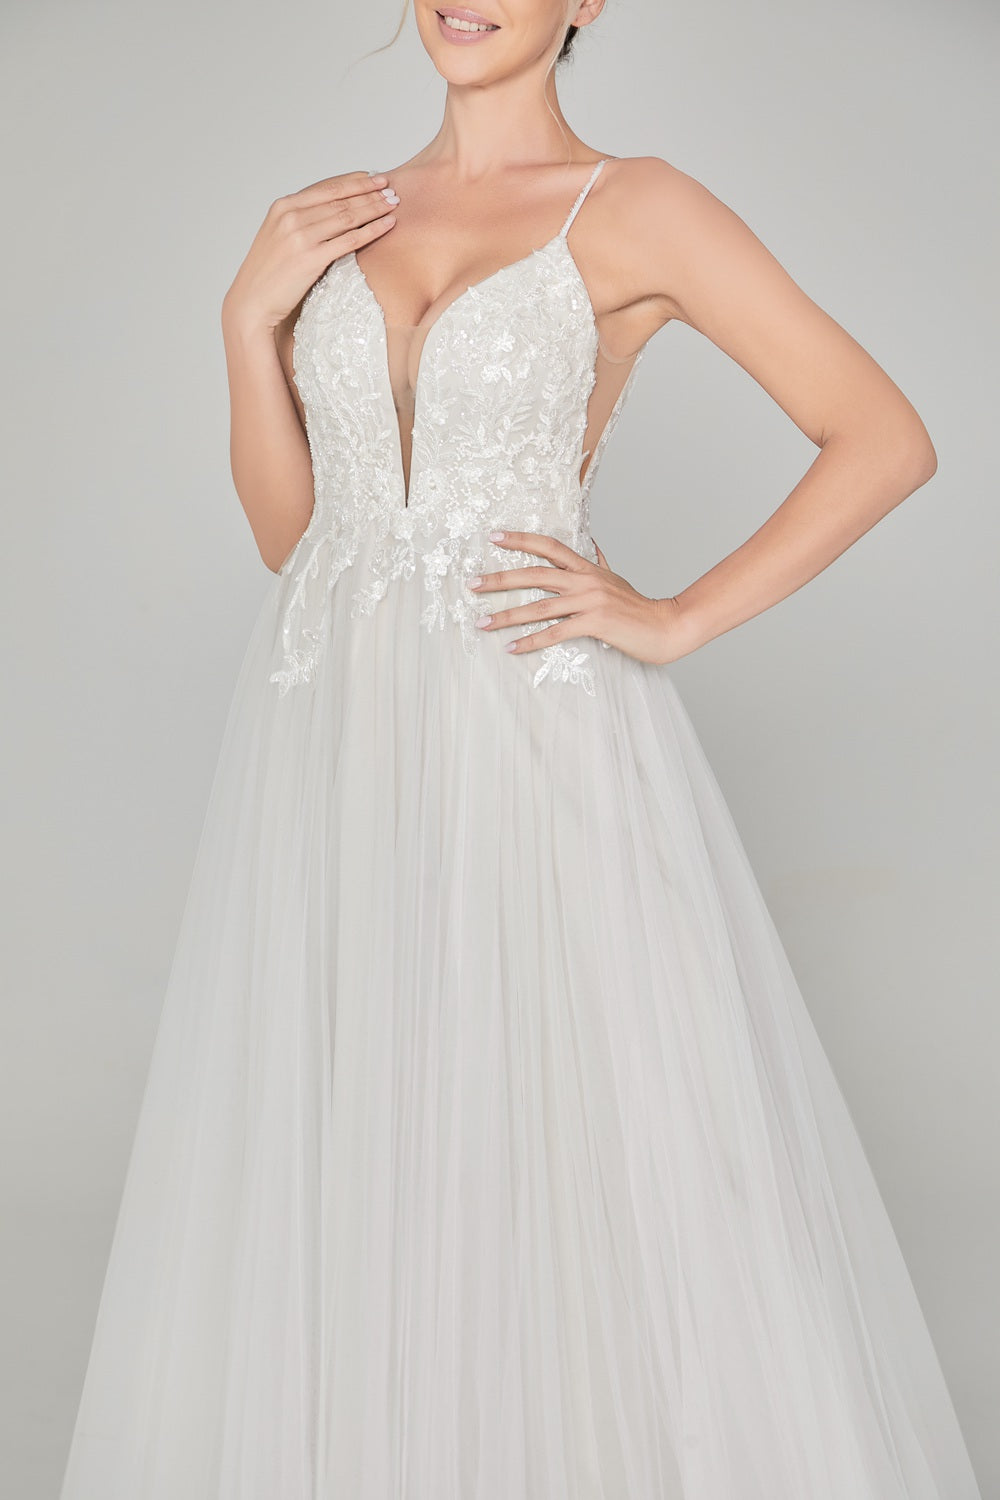 Lace Petal and Tulle Wedding Gown - A Floral Fantasy 32847